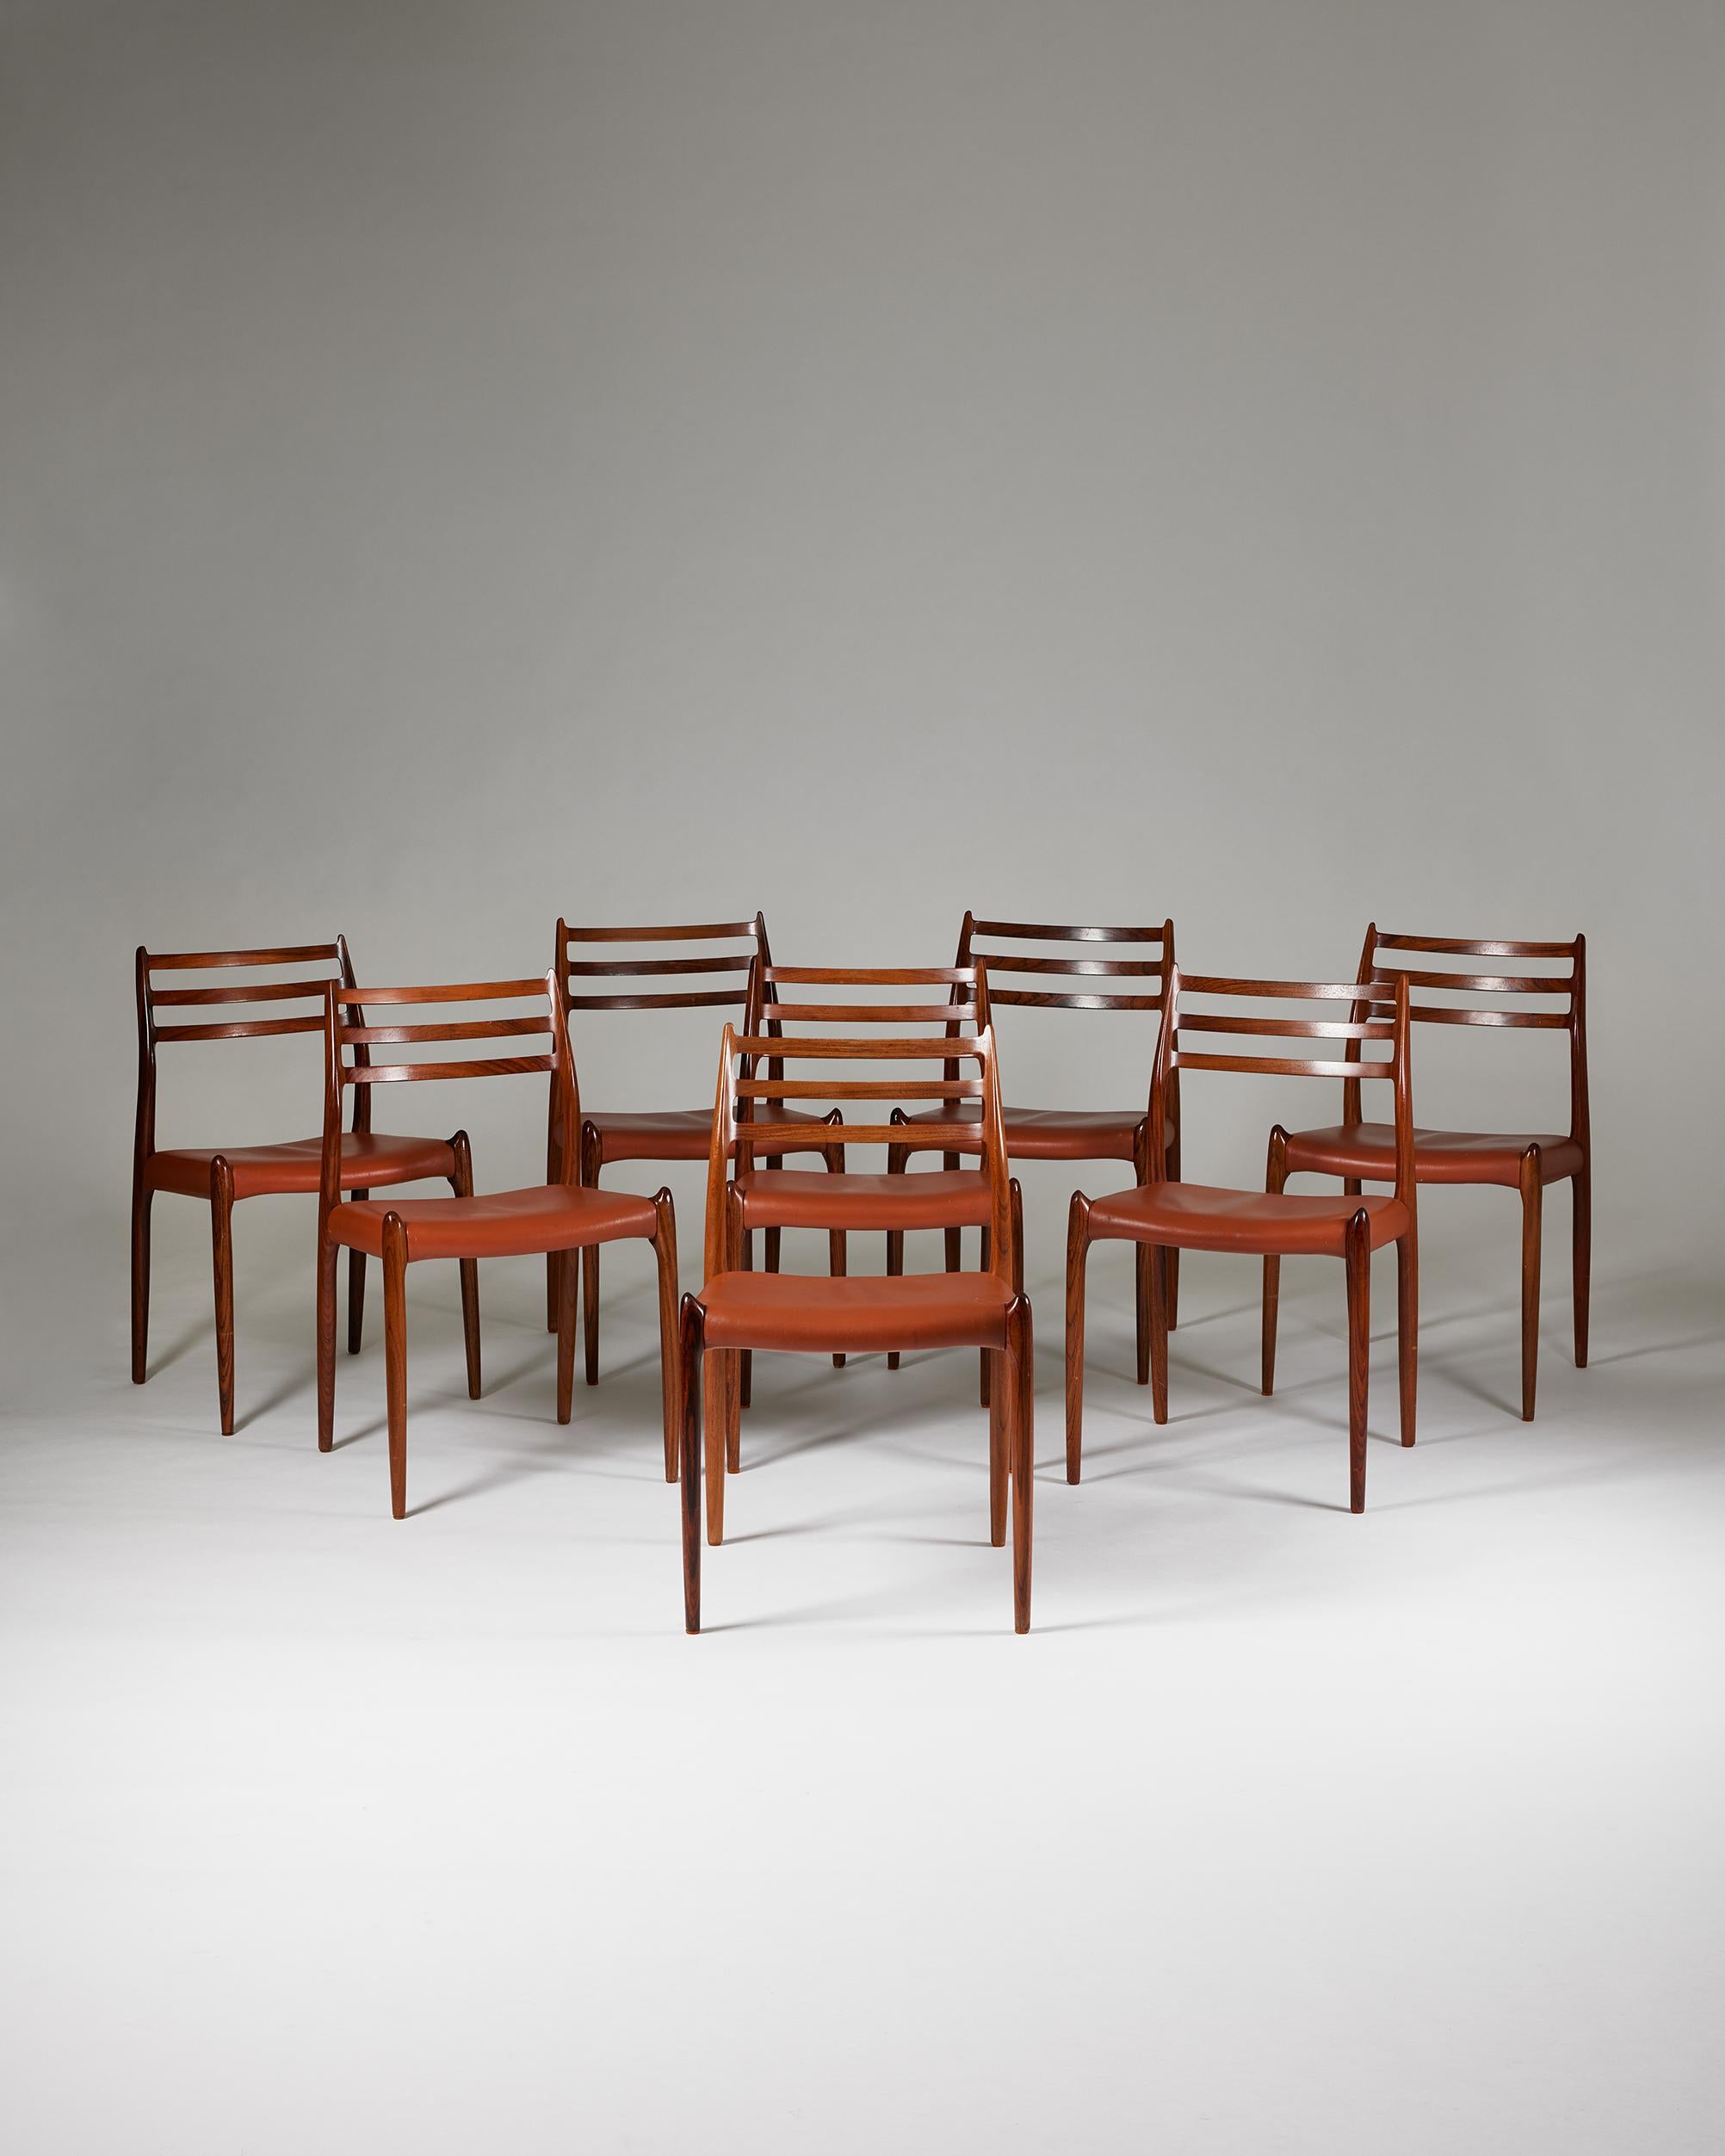 Set of eight dining chairs model 78 designed by Niels O. Möller for J. L. Möller,
Denmark, 1962.

Rosewood and leather.

Stamped.

Dimensions:
H: 81.5 cm / 2' 8''
W: 49 cm / 19 1/4''
D: 50 cm / 19 3/4''
SH: 44 cm / 17 1/4''

In 1944, Niels Otto